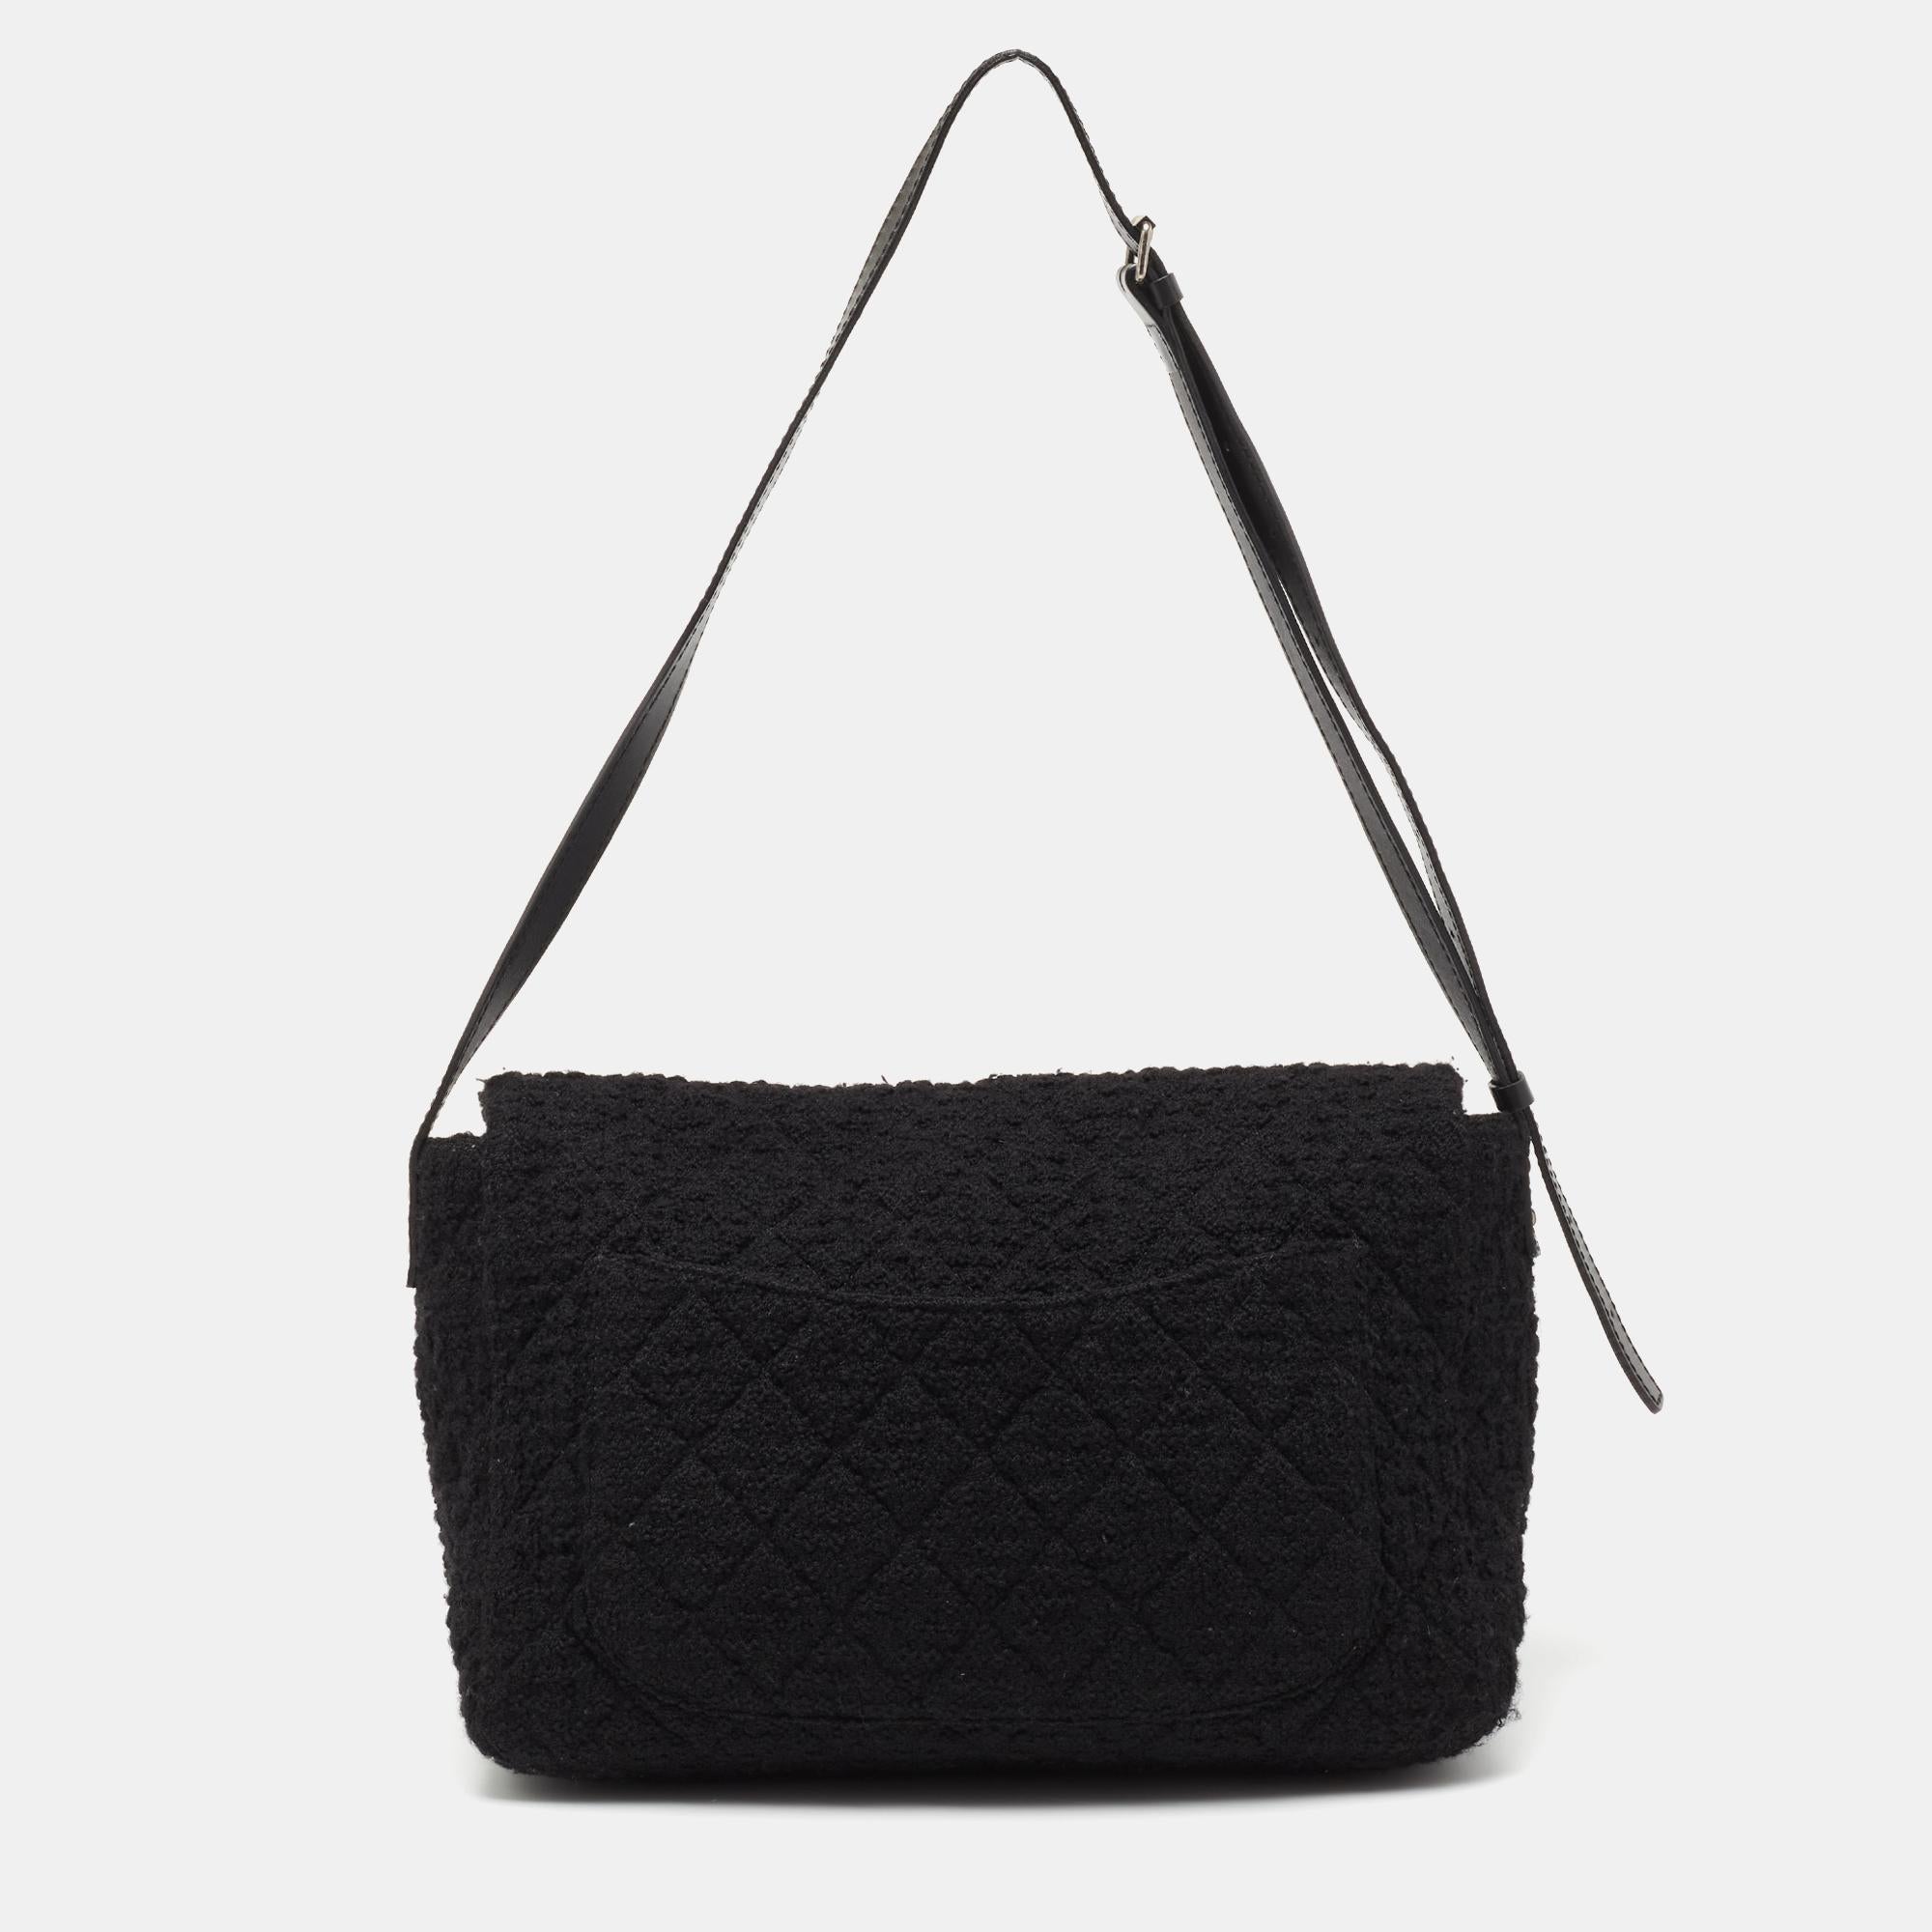 Introduce Chanel's irreplaceable style to your closet with this Reissue 2.55 XL Flap bag. Crafted using black tweed, the bag has a signature quilted exterior, the Mademoiselle lock on the front, and a canvas-lined interior. Complete with a shoulder